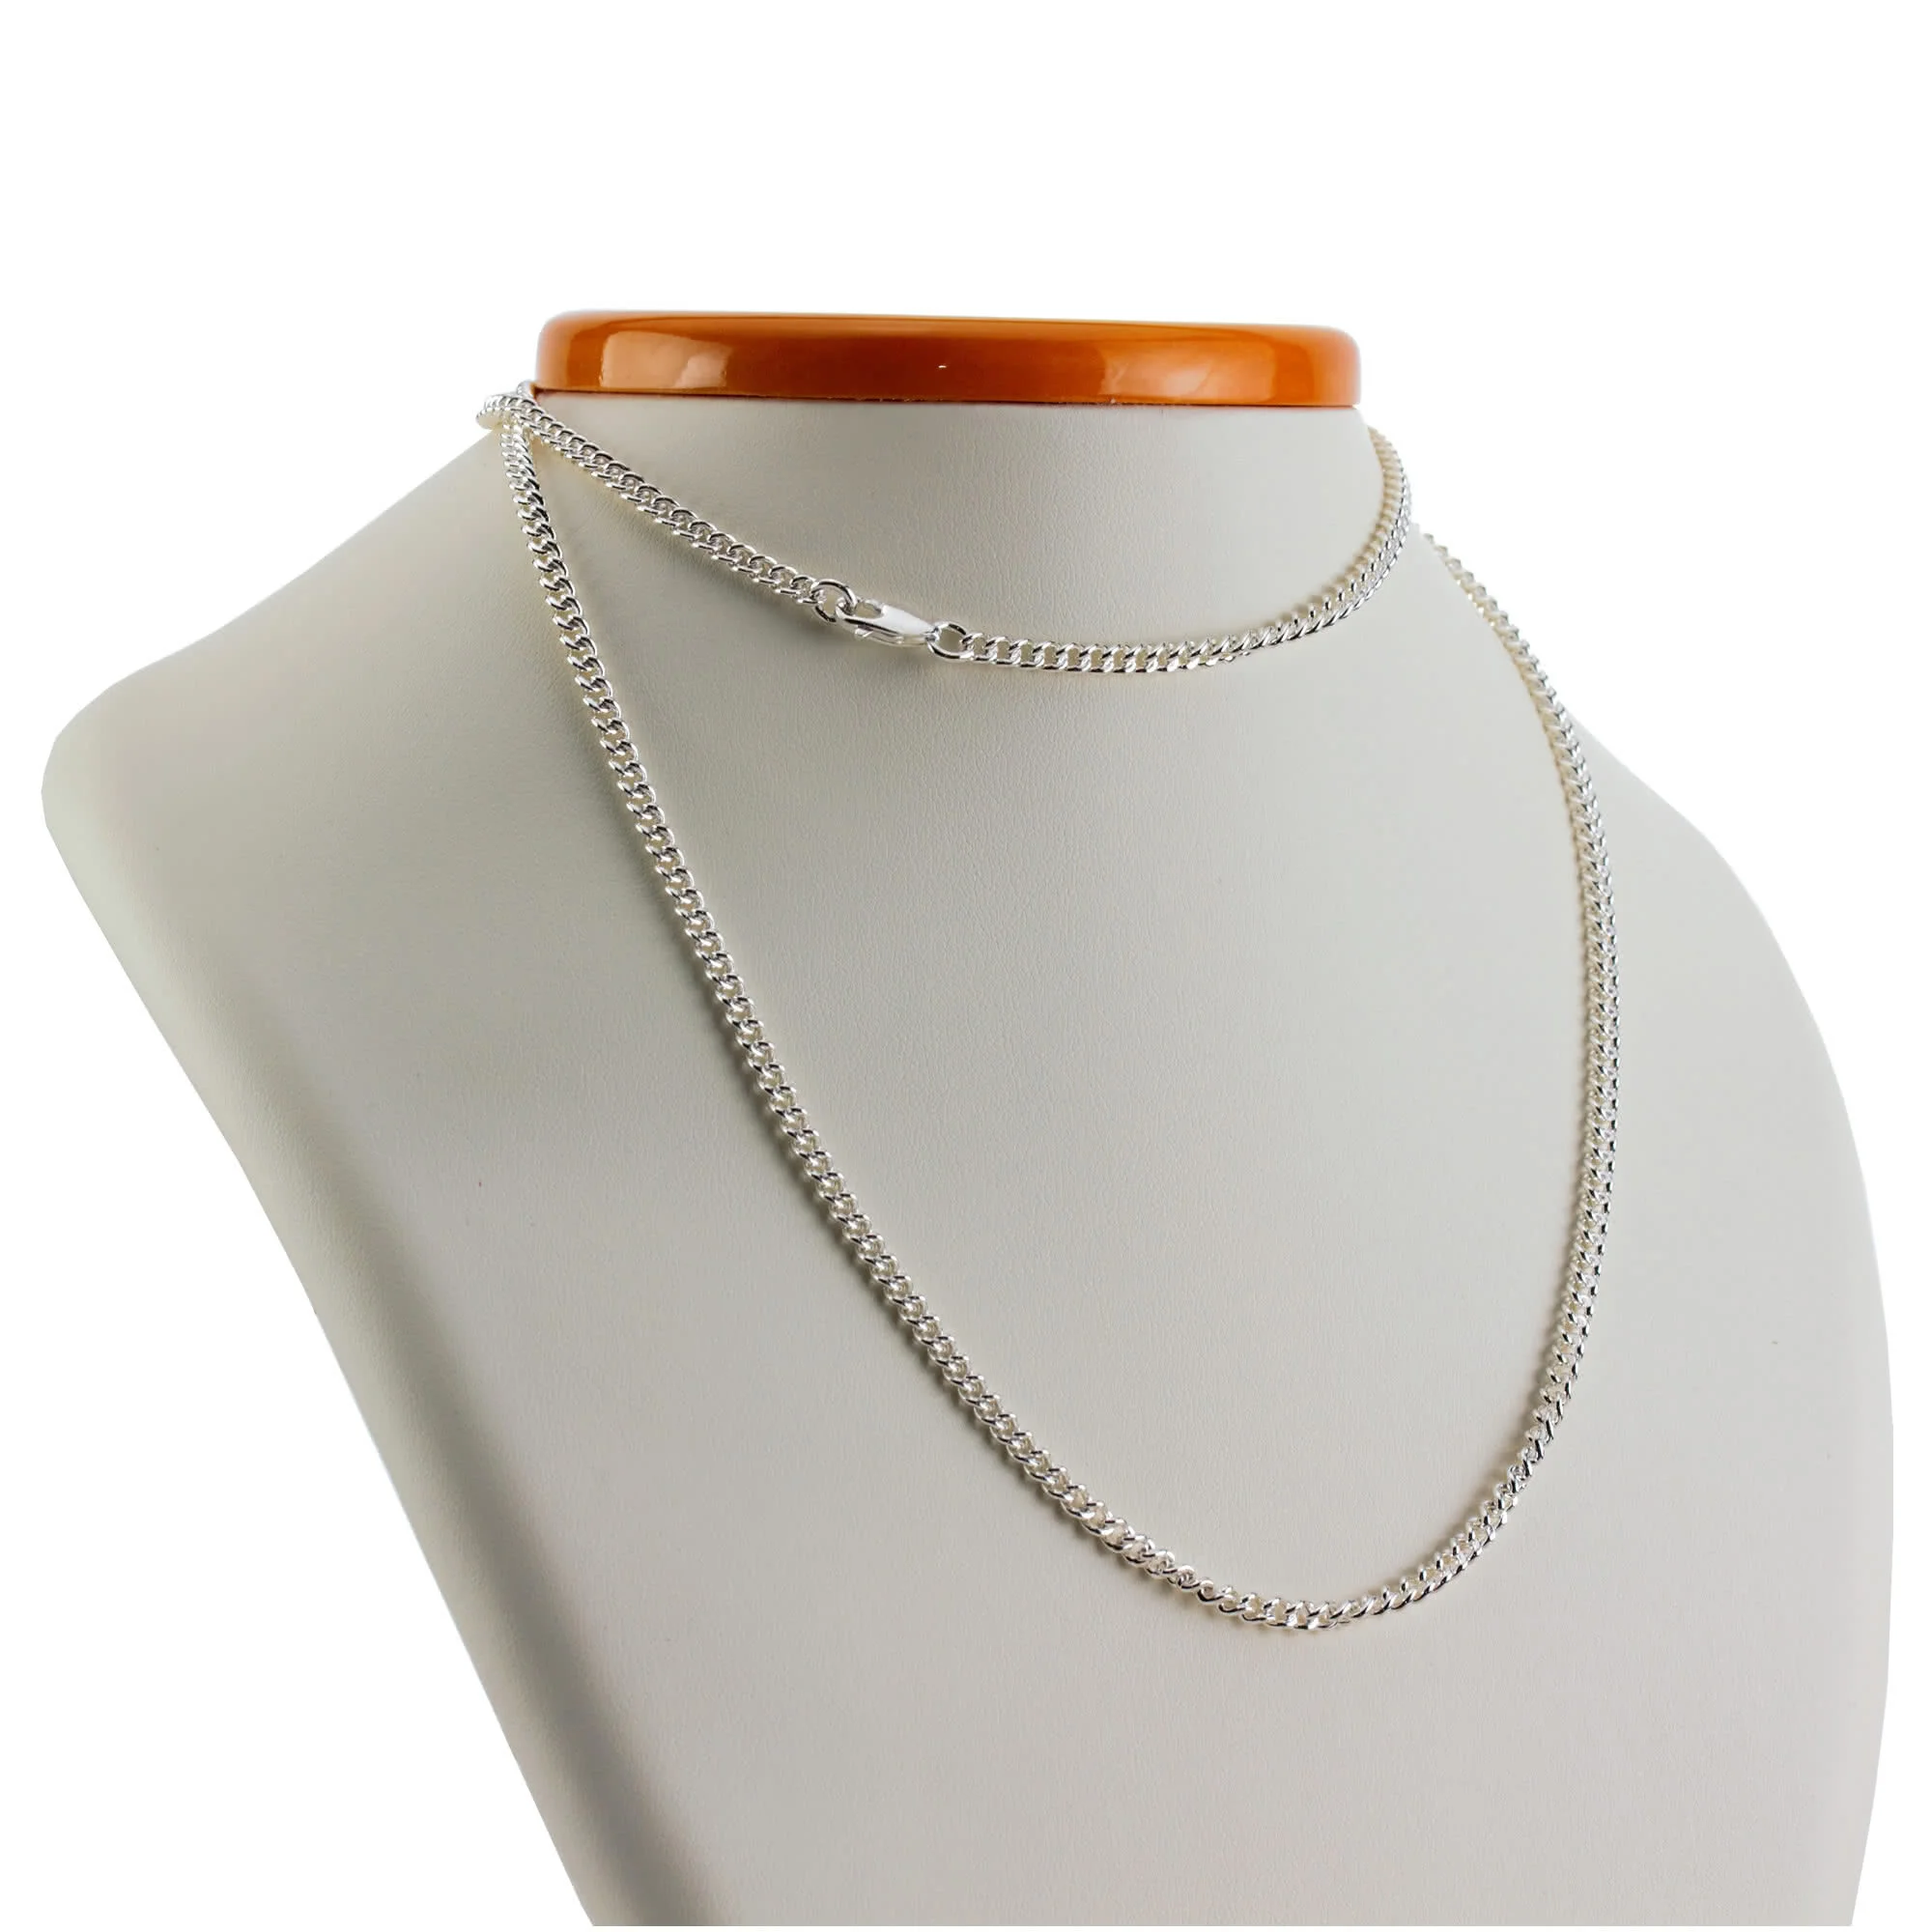 3.5mm Wide Solid Sterling Silver Rounded Curb Chain